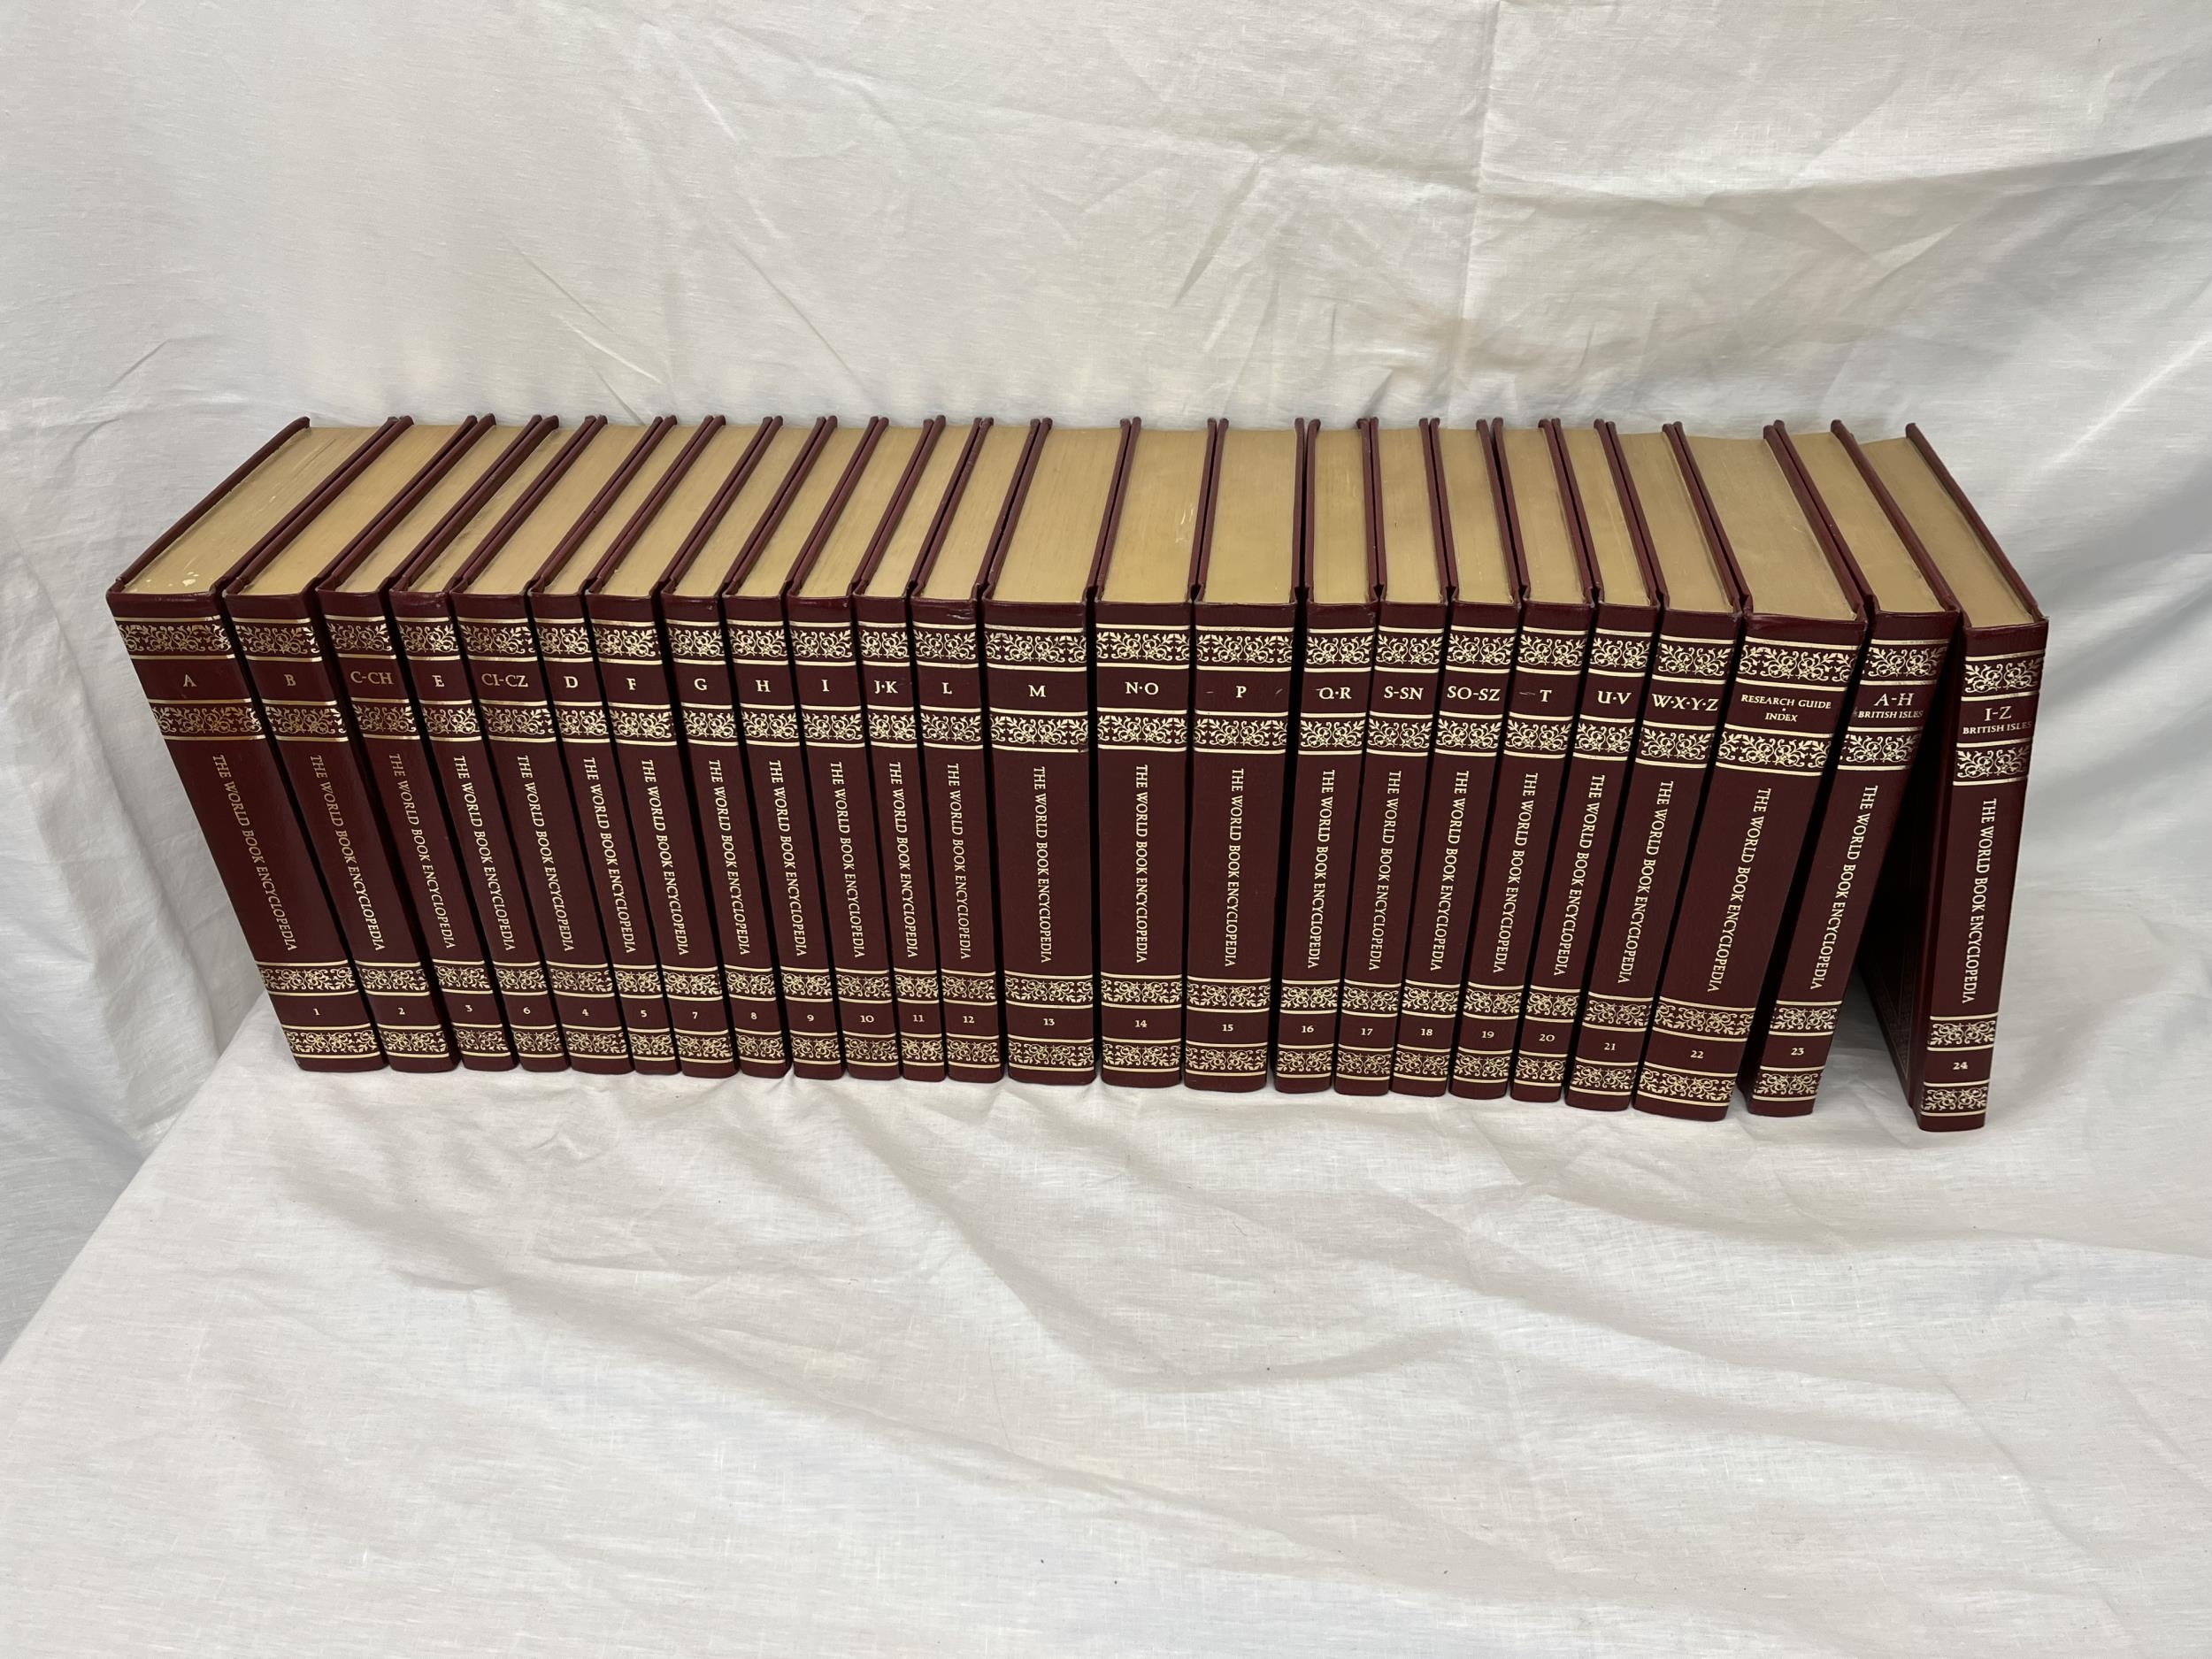 The World Book Encyclopaedia, complete set of 24 volumes. H.25.5cm. - Image 2 of 3